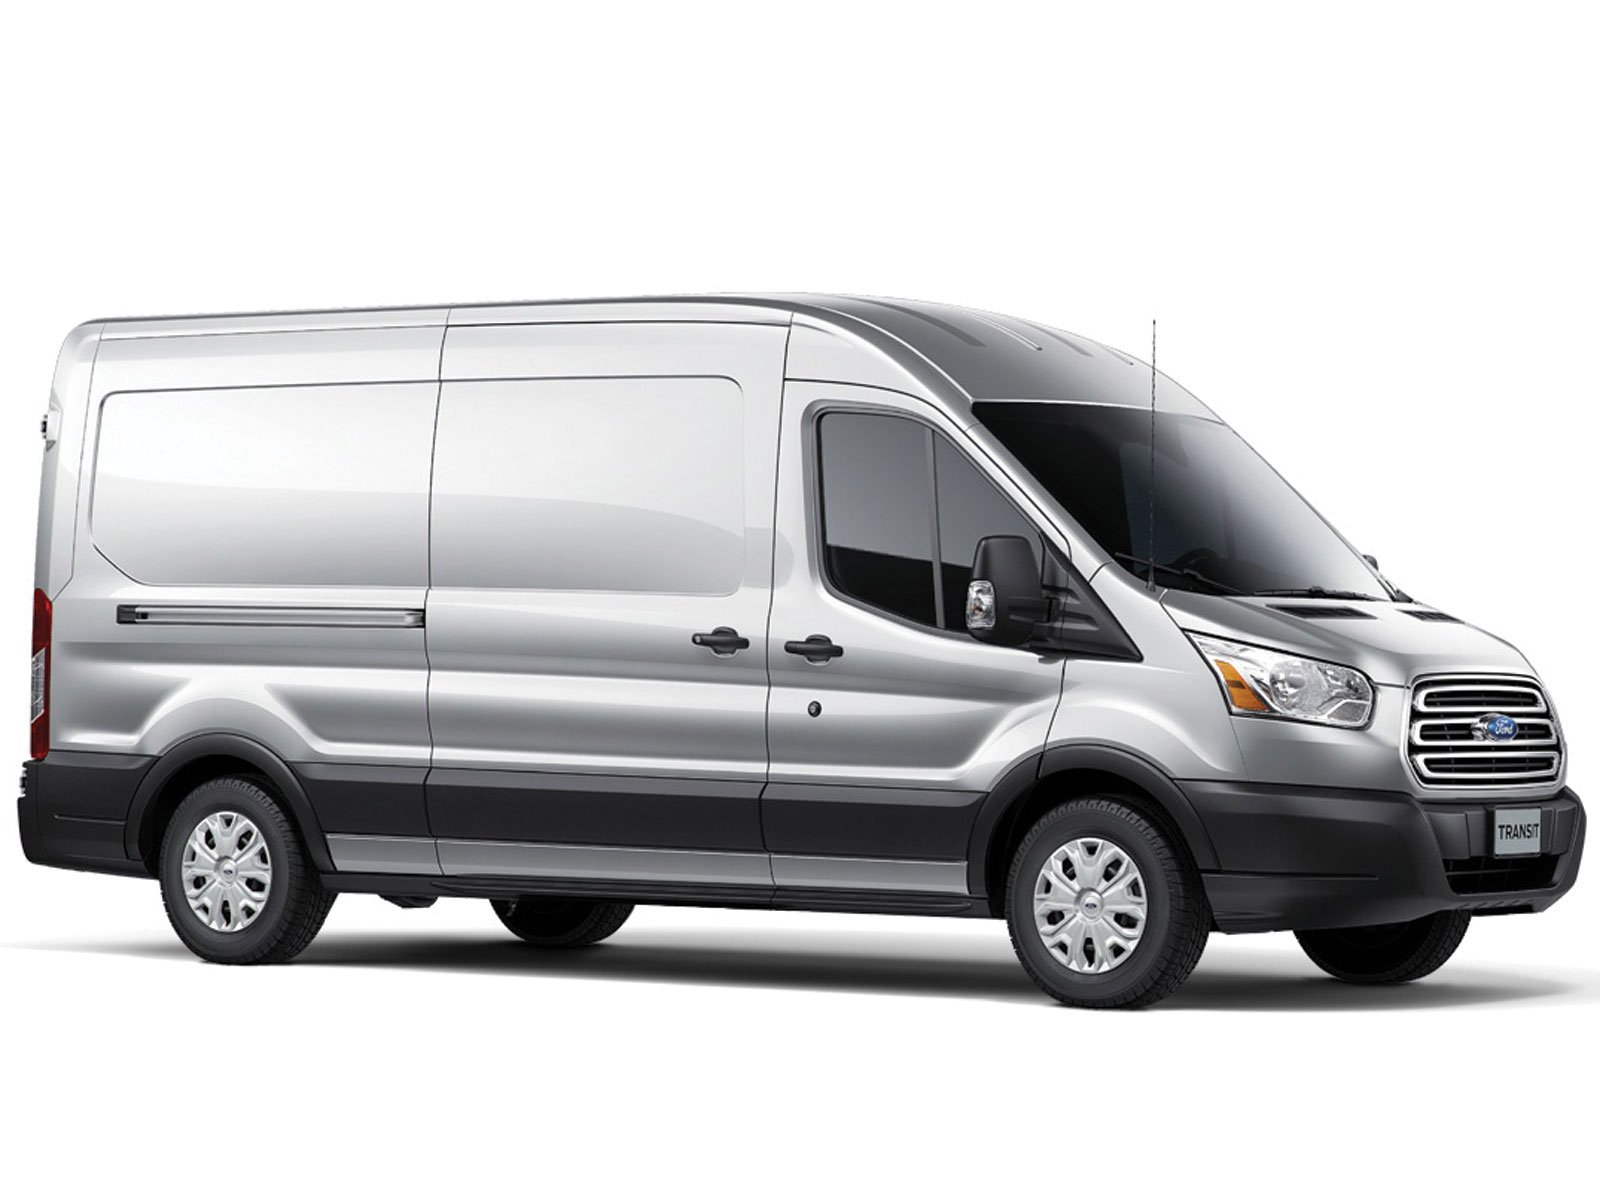 Ford Transit Reviews - ProductReview.com.au